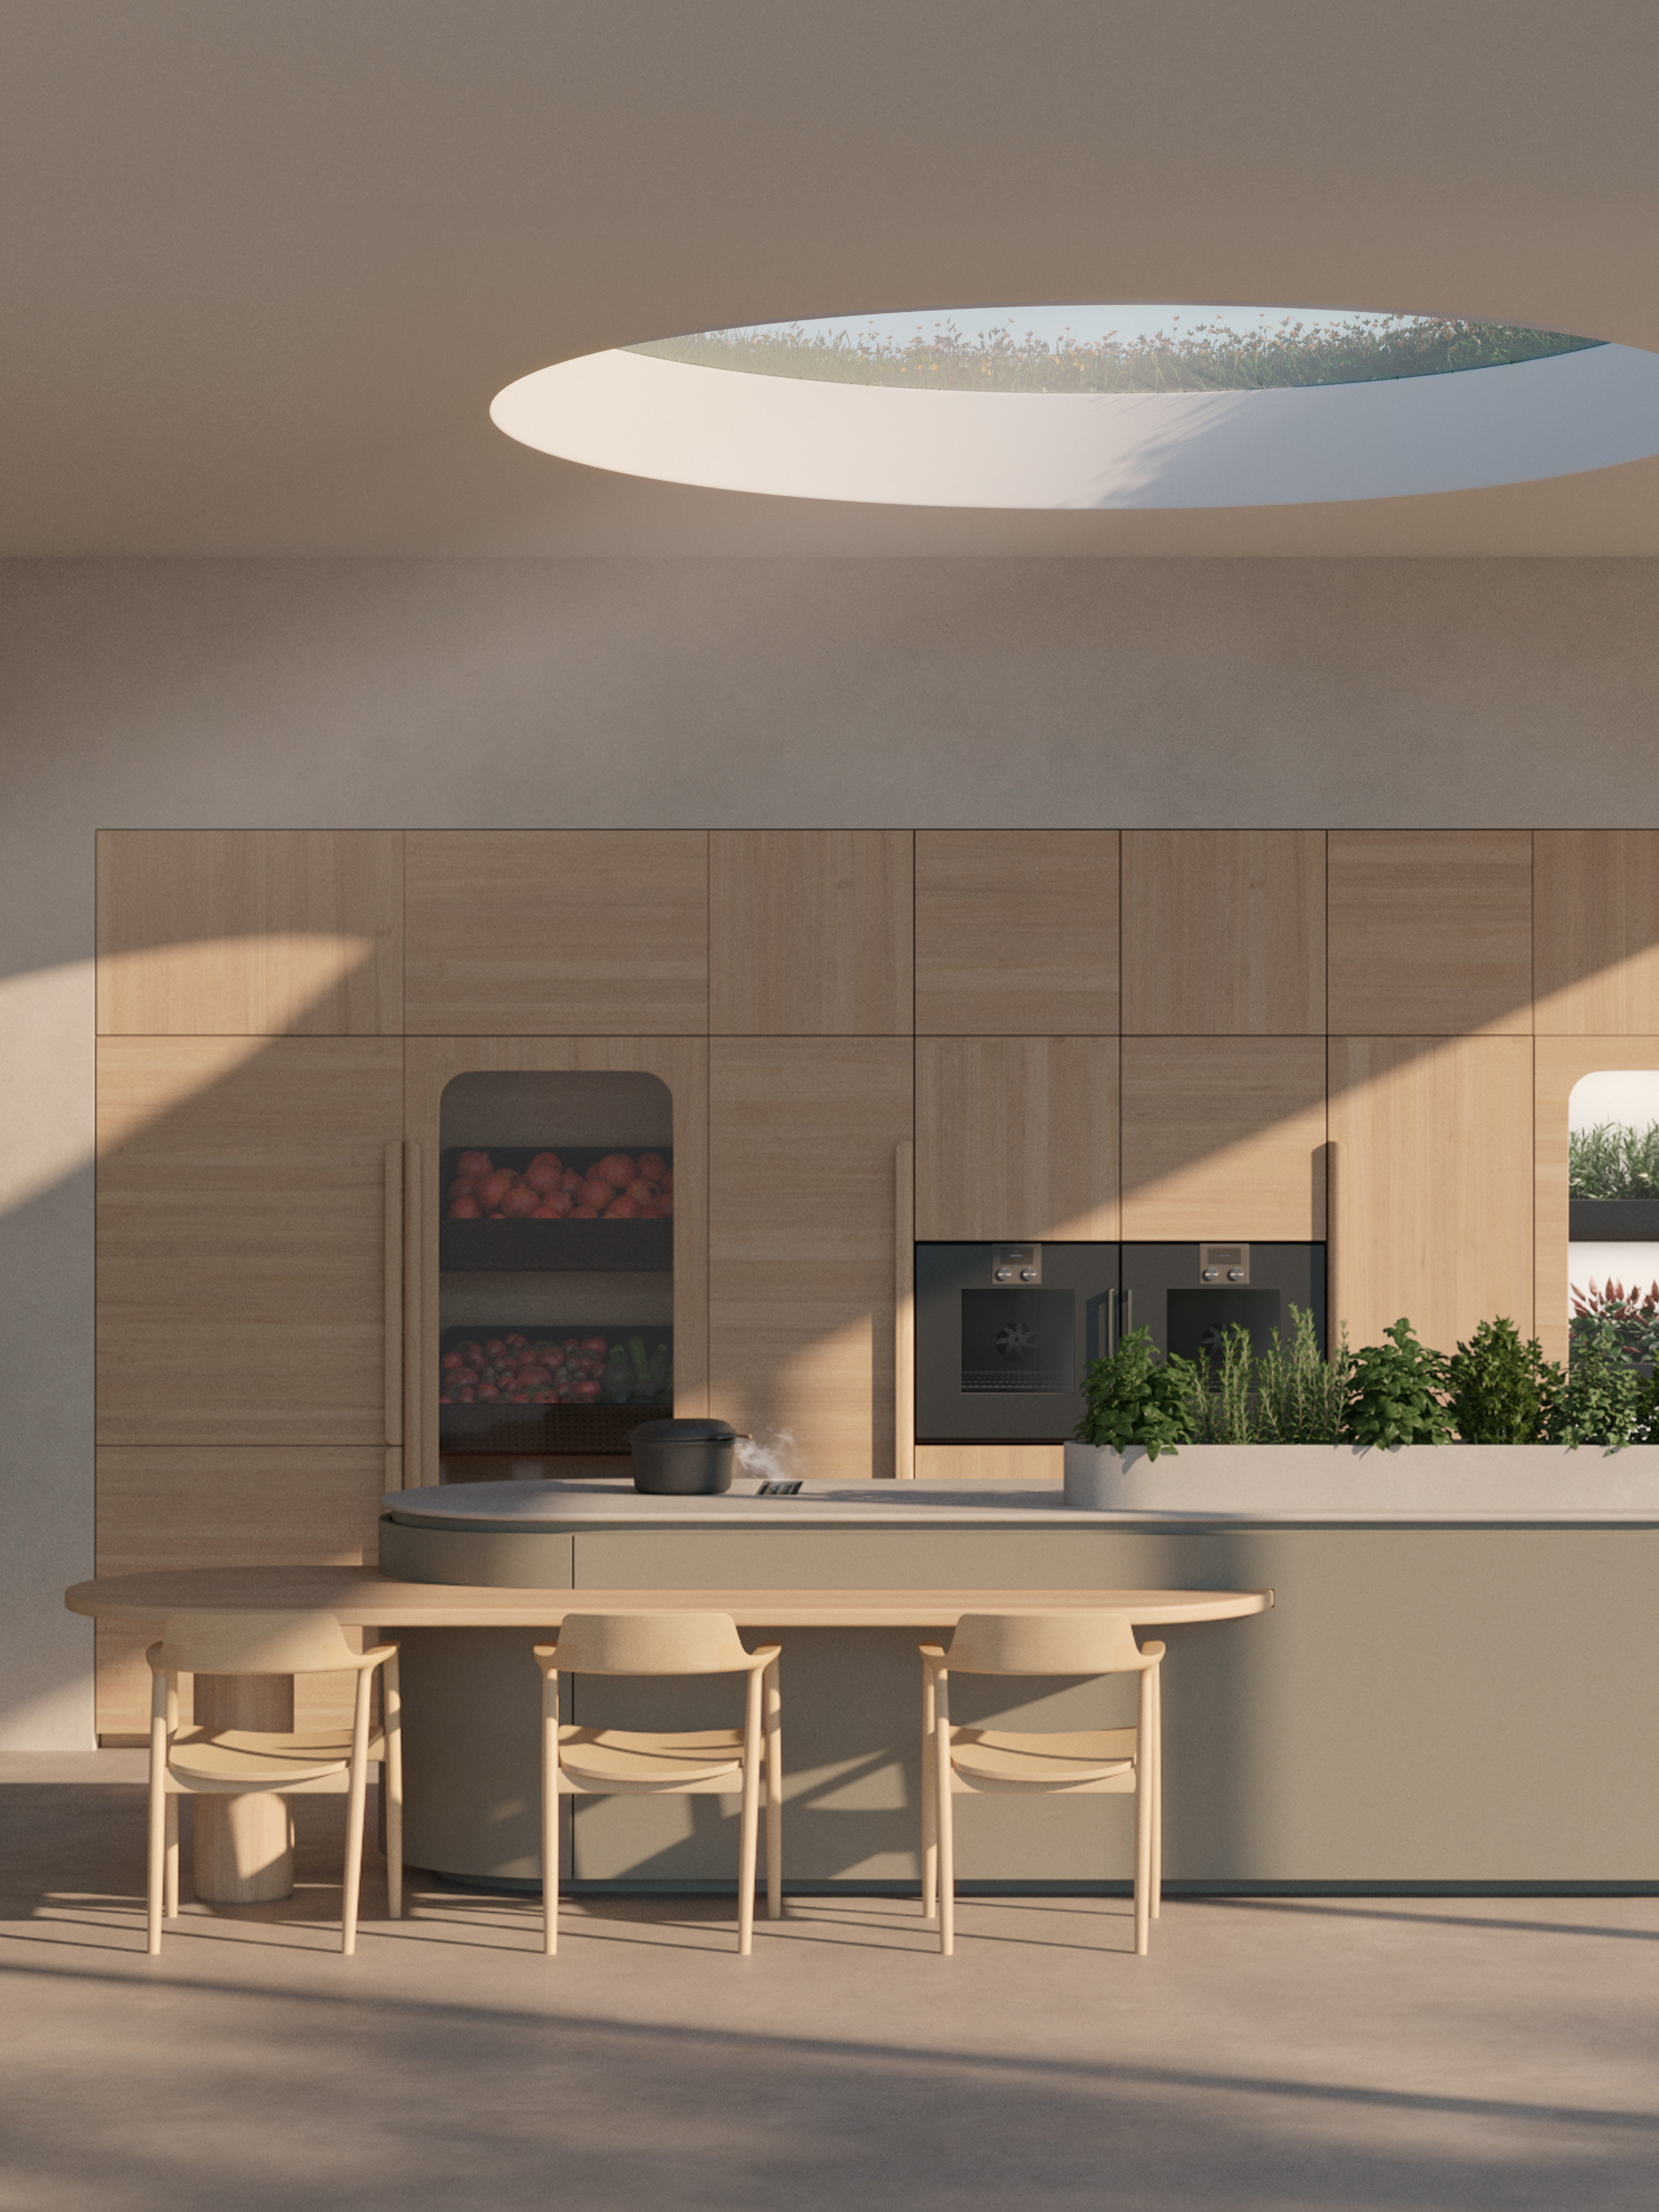 Kitchens of the future: this is how we believe they wil